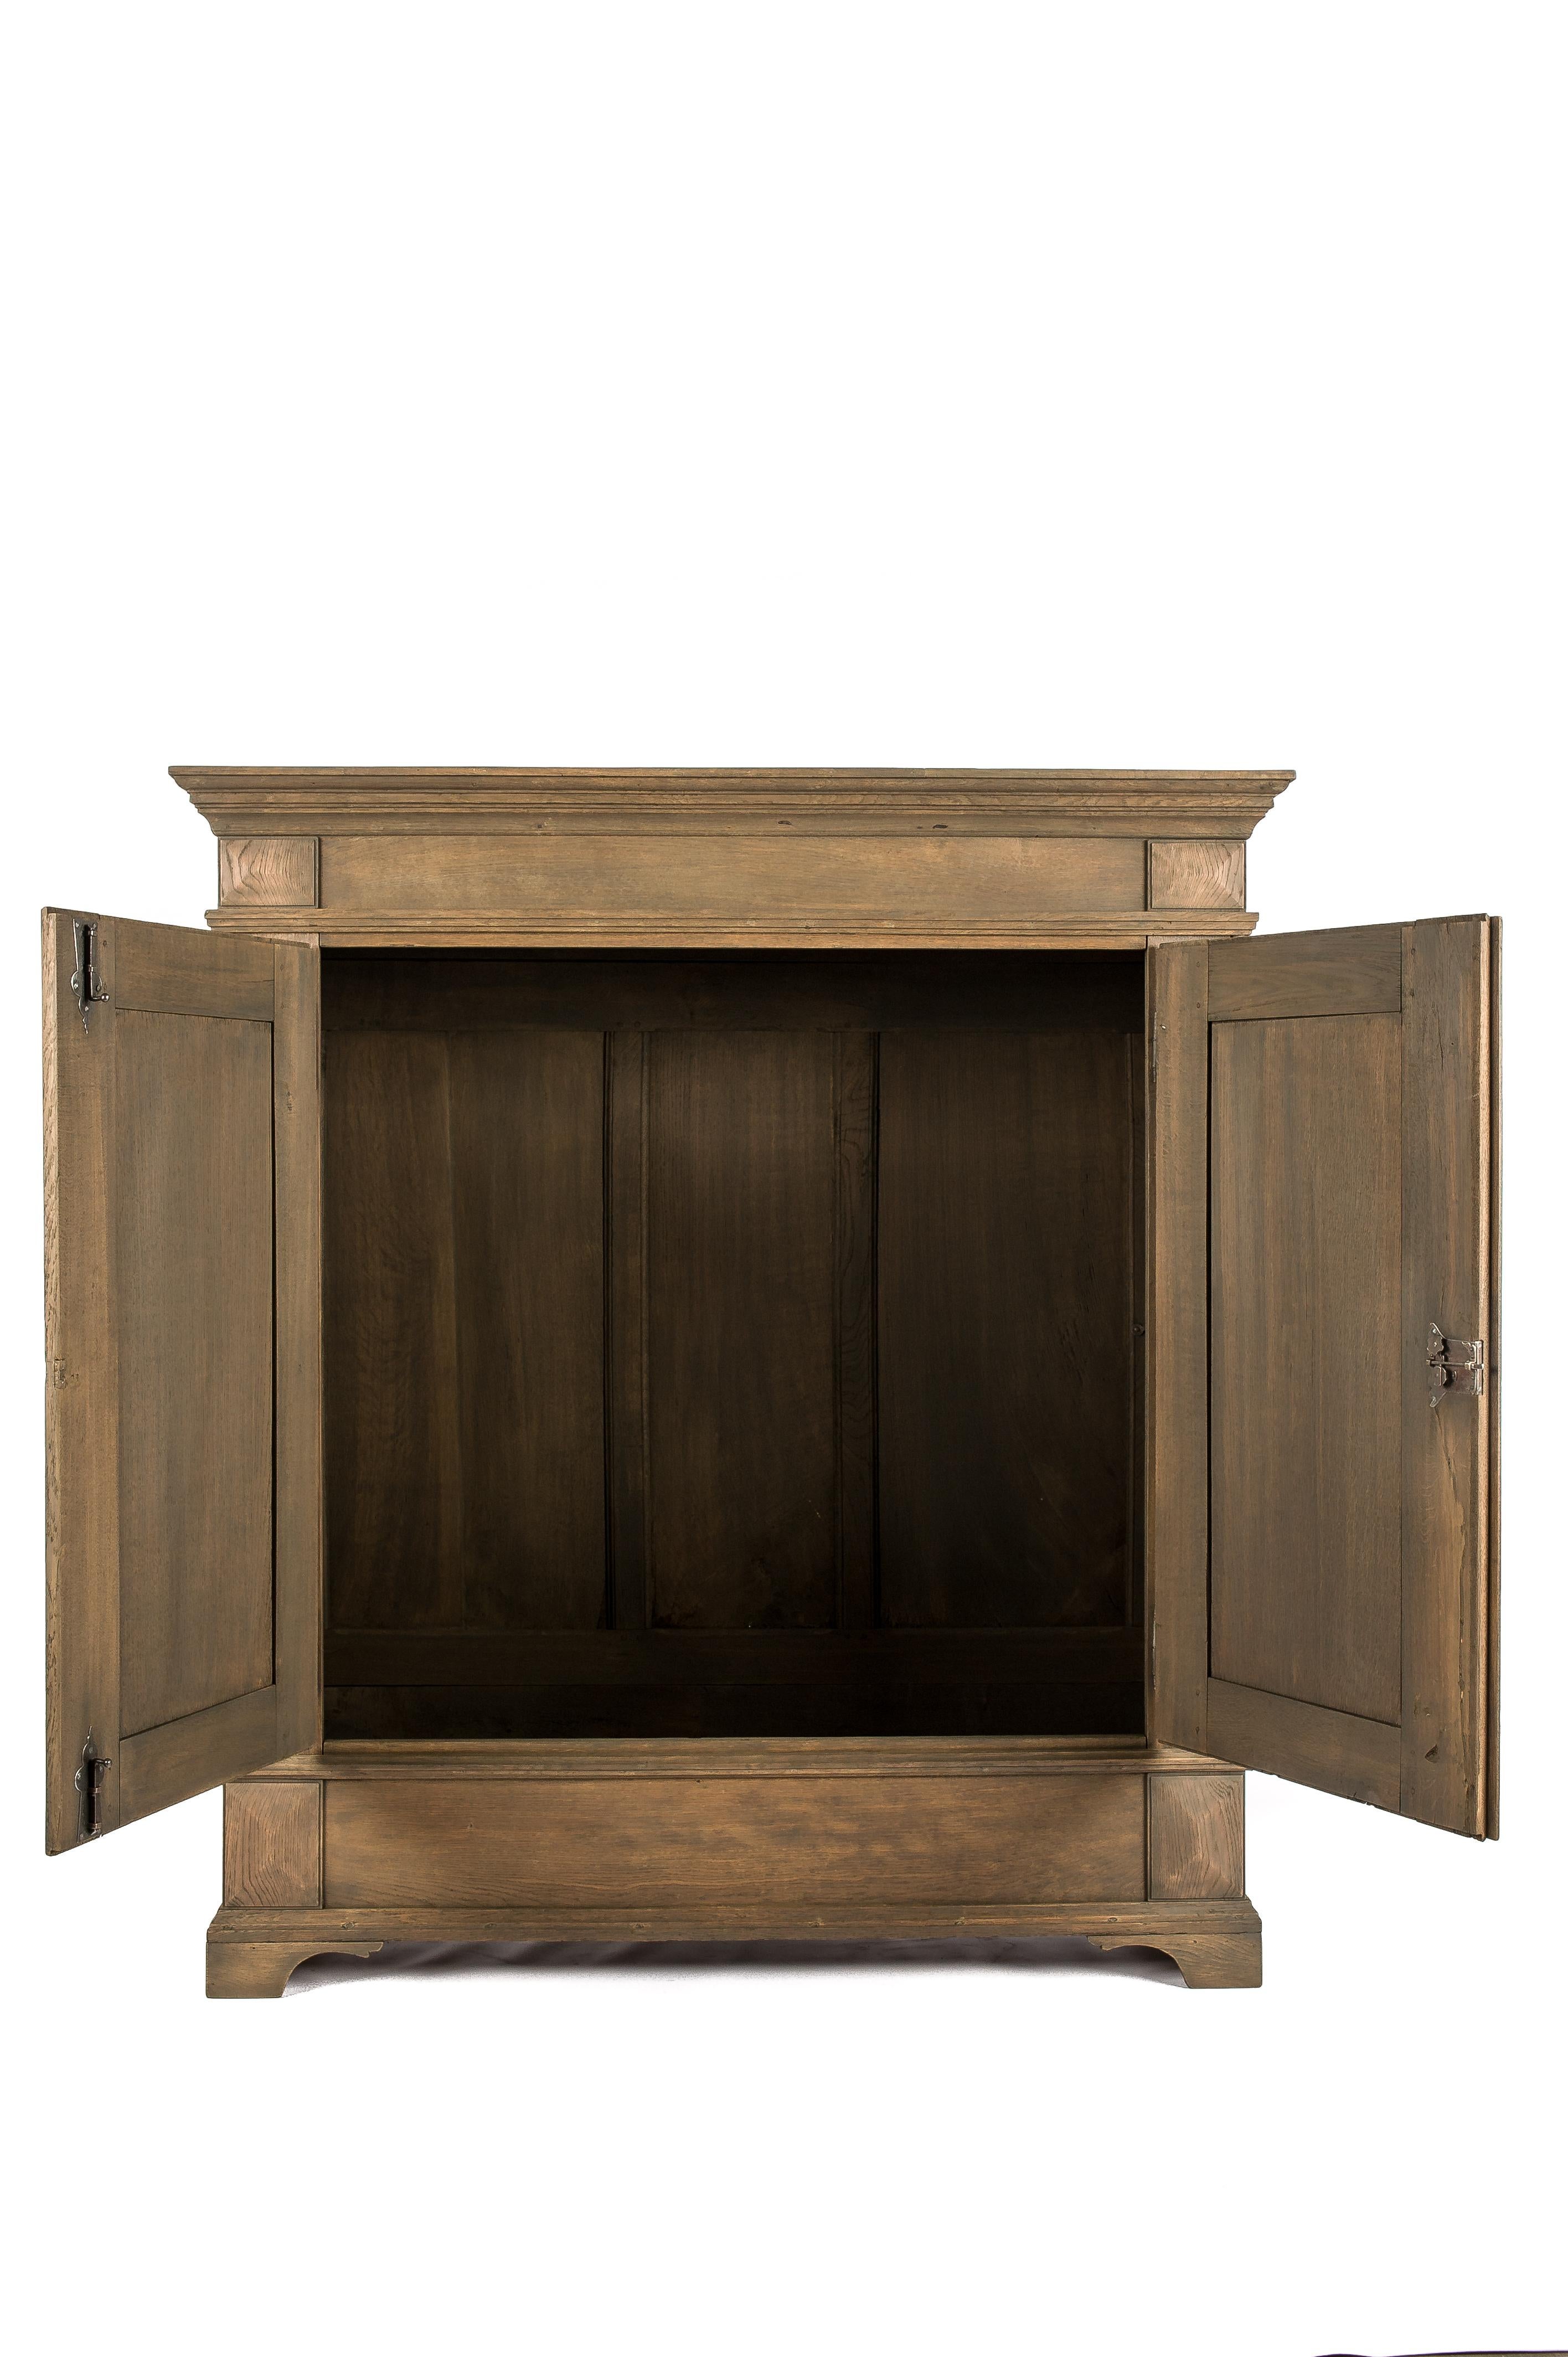 Antique 19th-century German solid oak two-door gray matte finished cupboard  For Sale 11